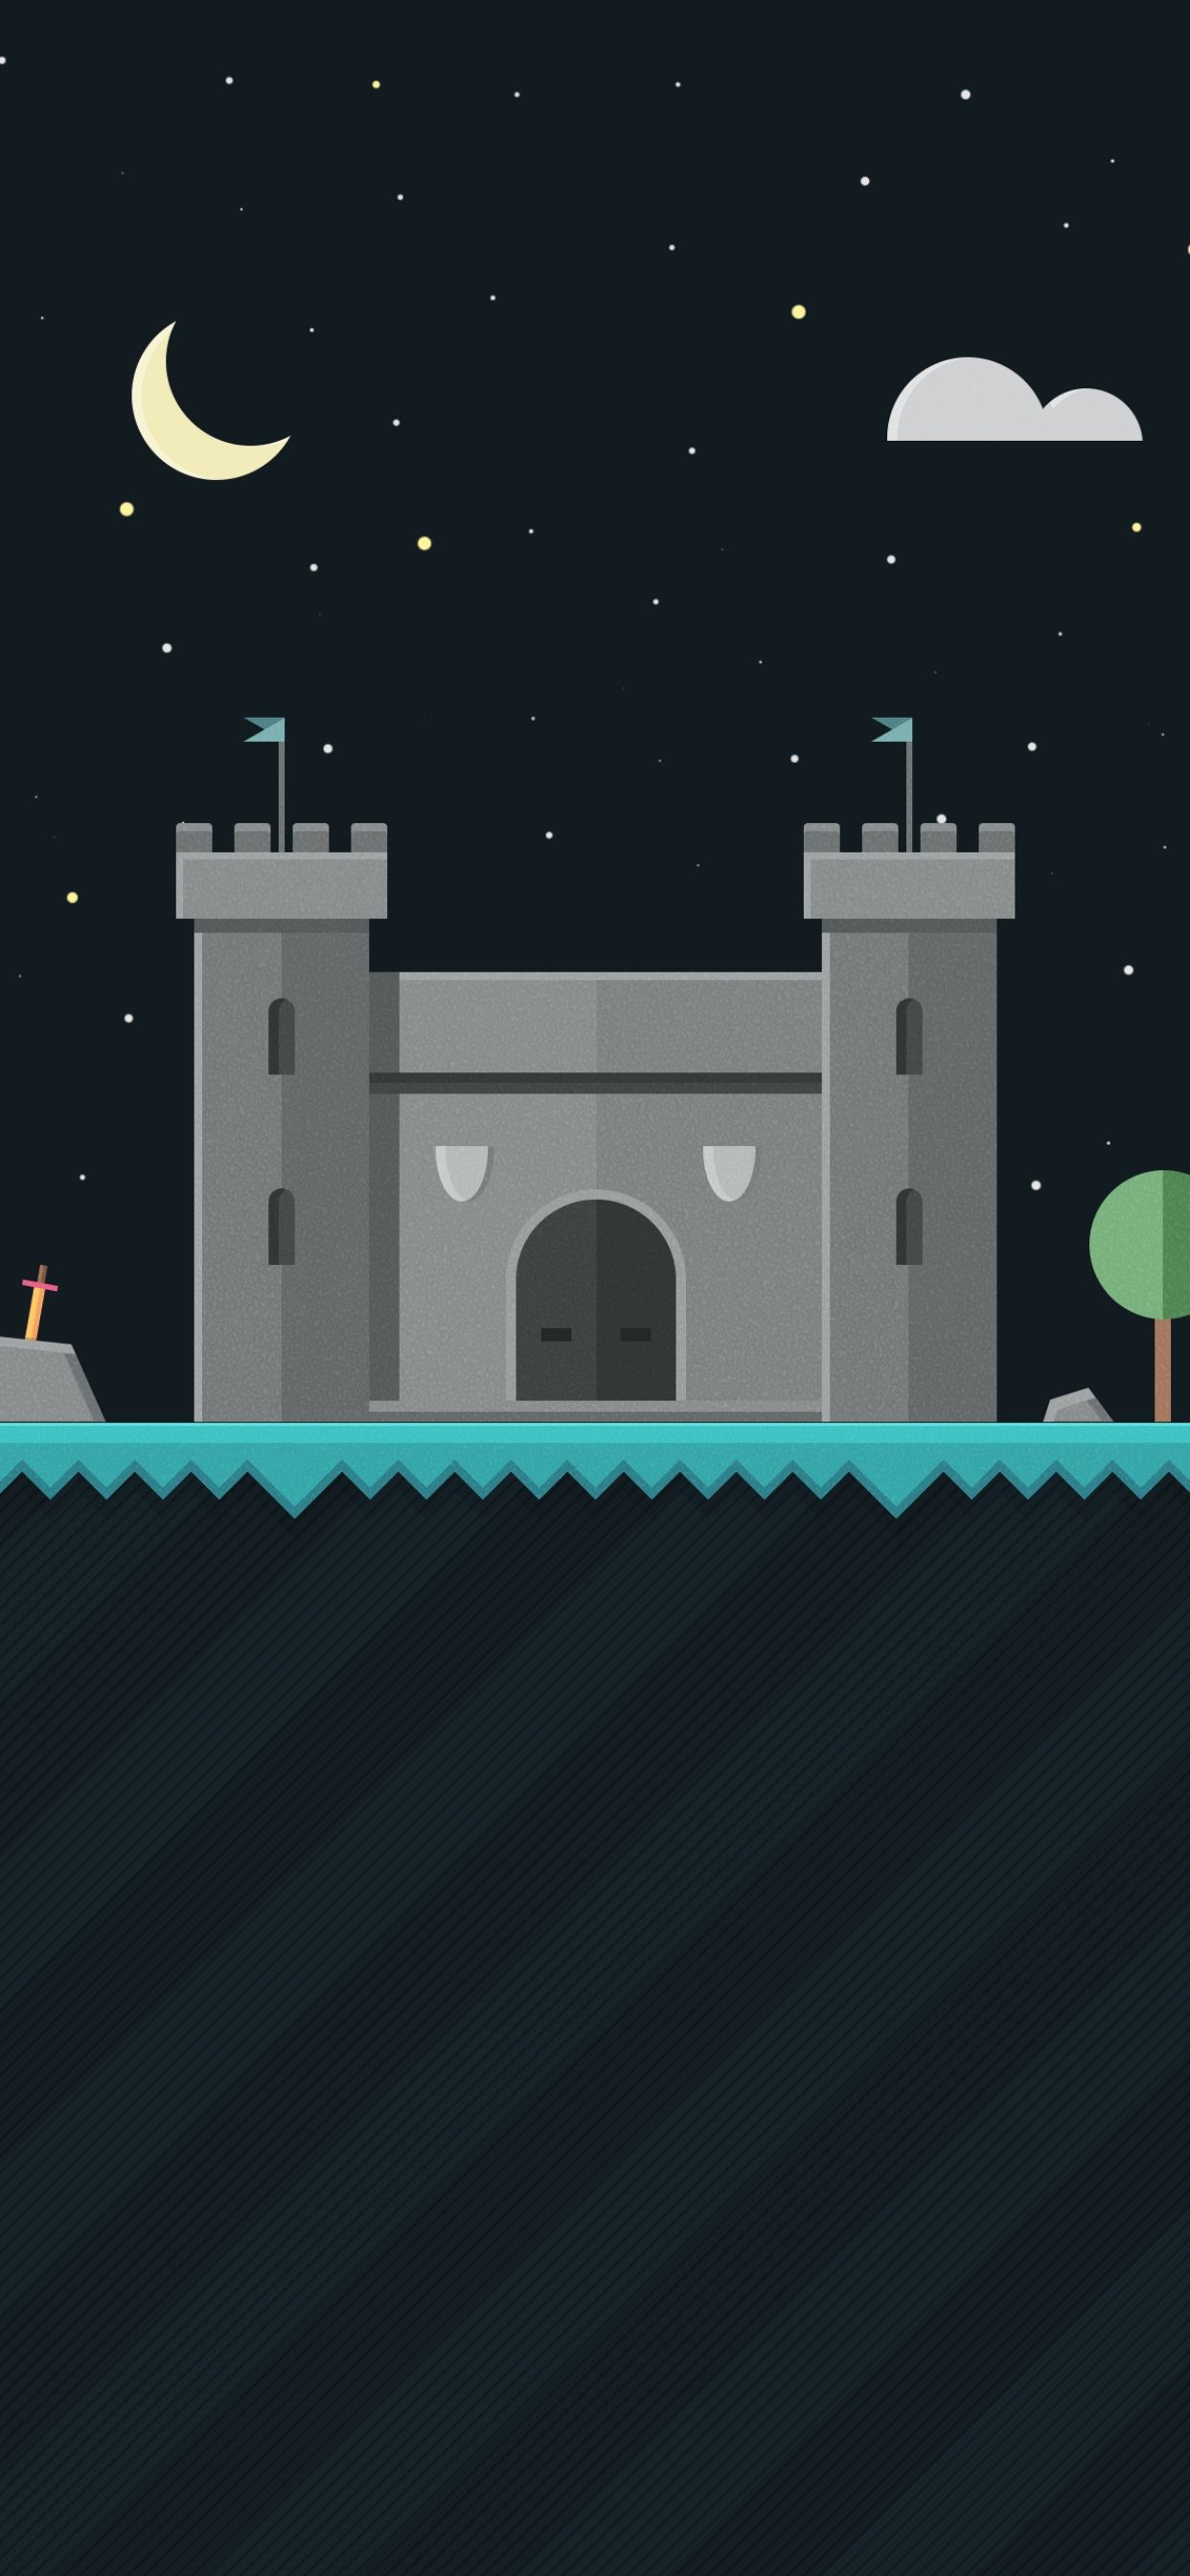 A castle on a hill at night - Castle